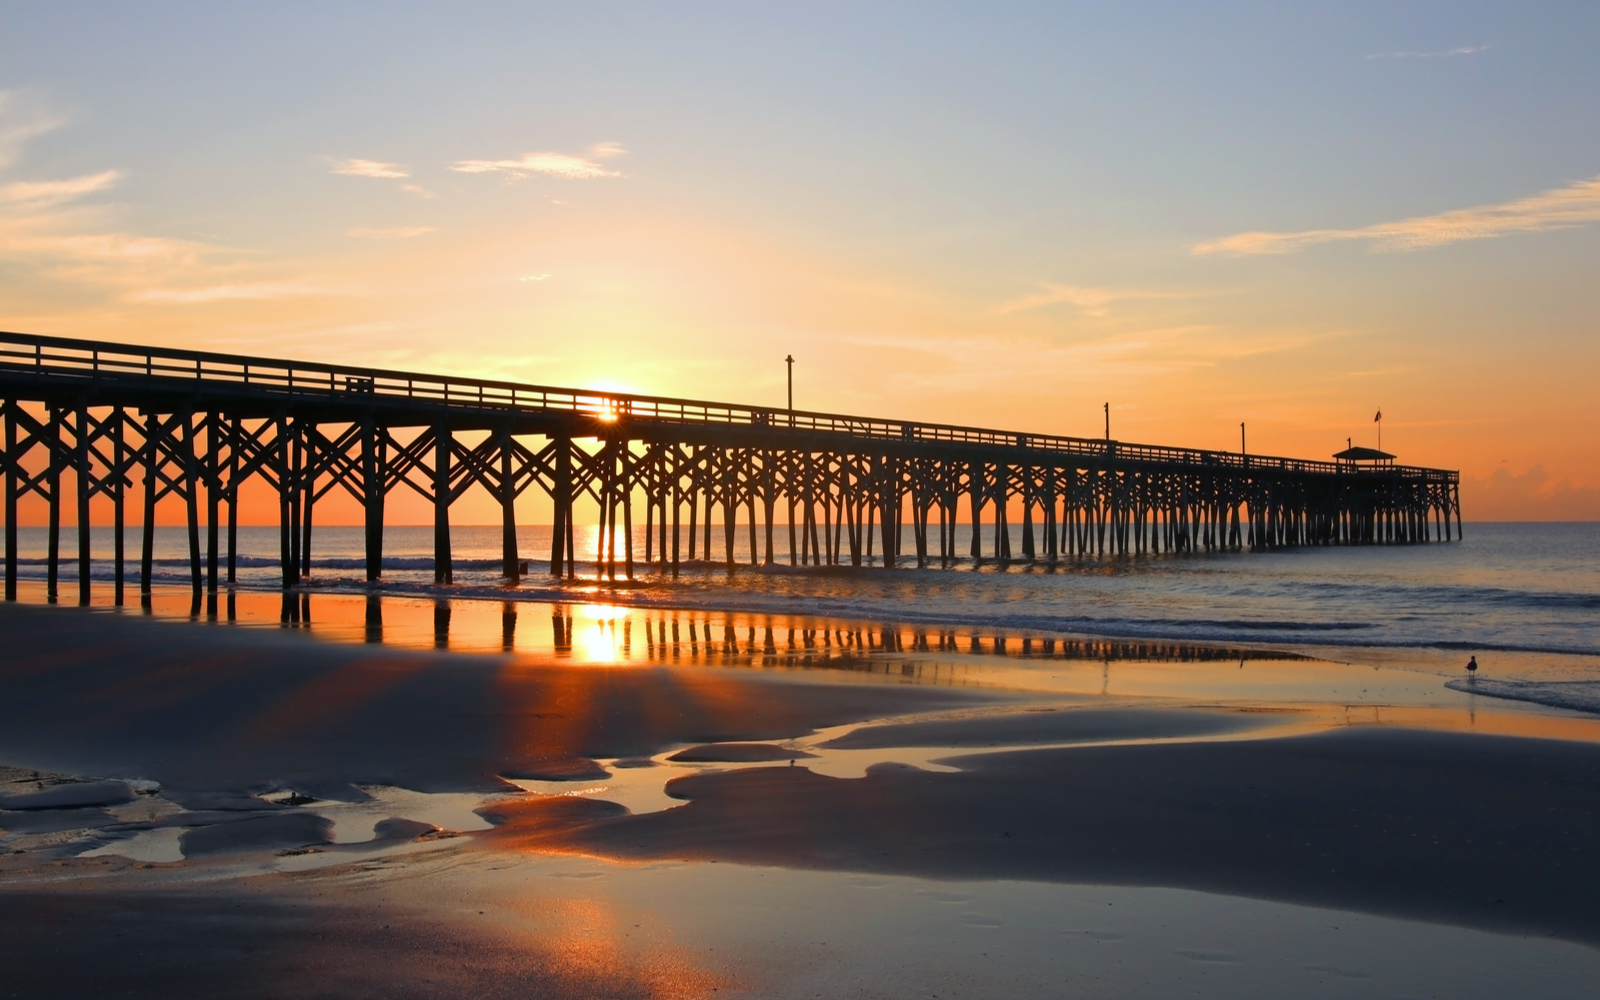 15 Best Things to Do in Myrtle Beach in 2022